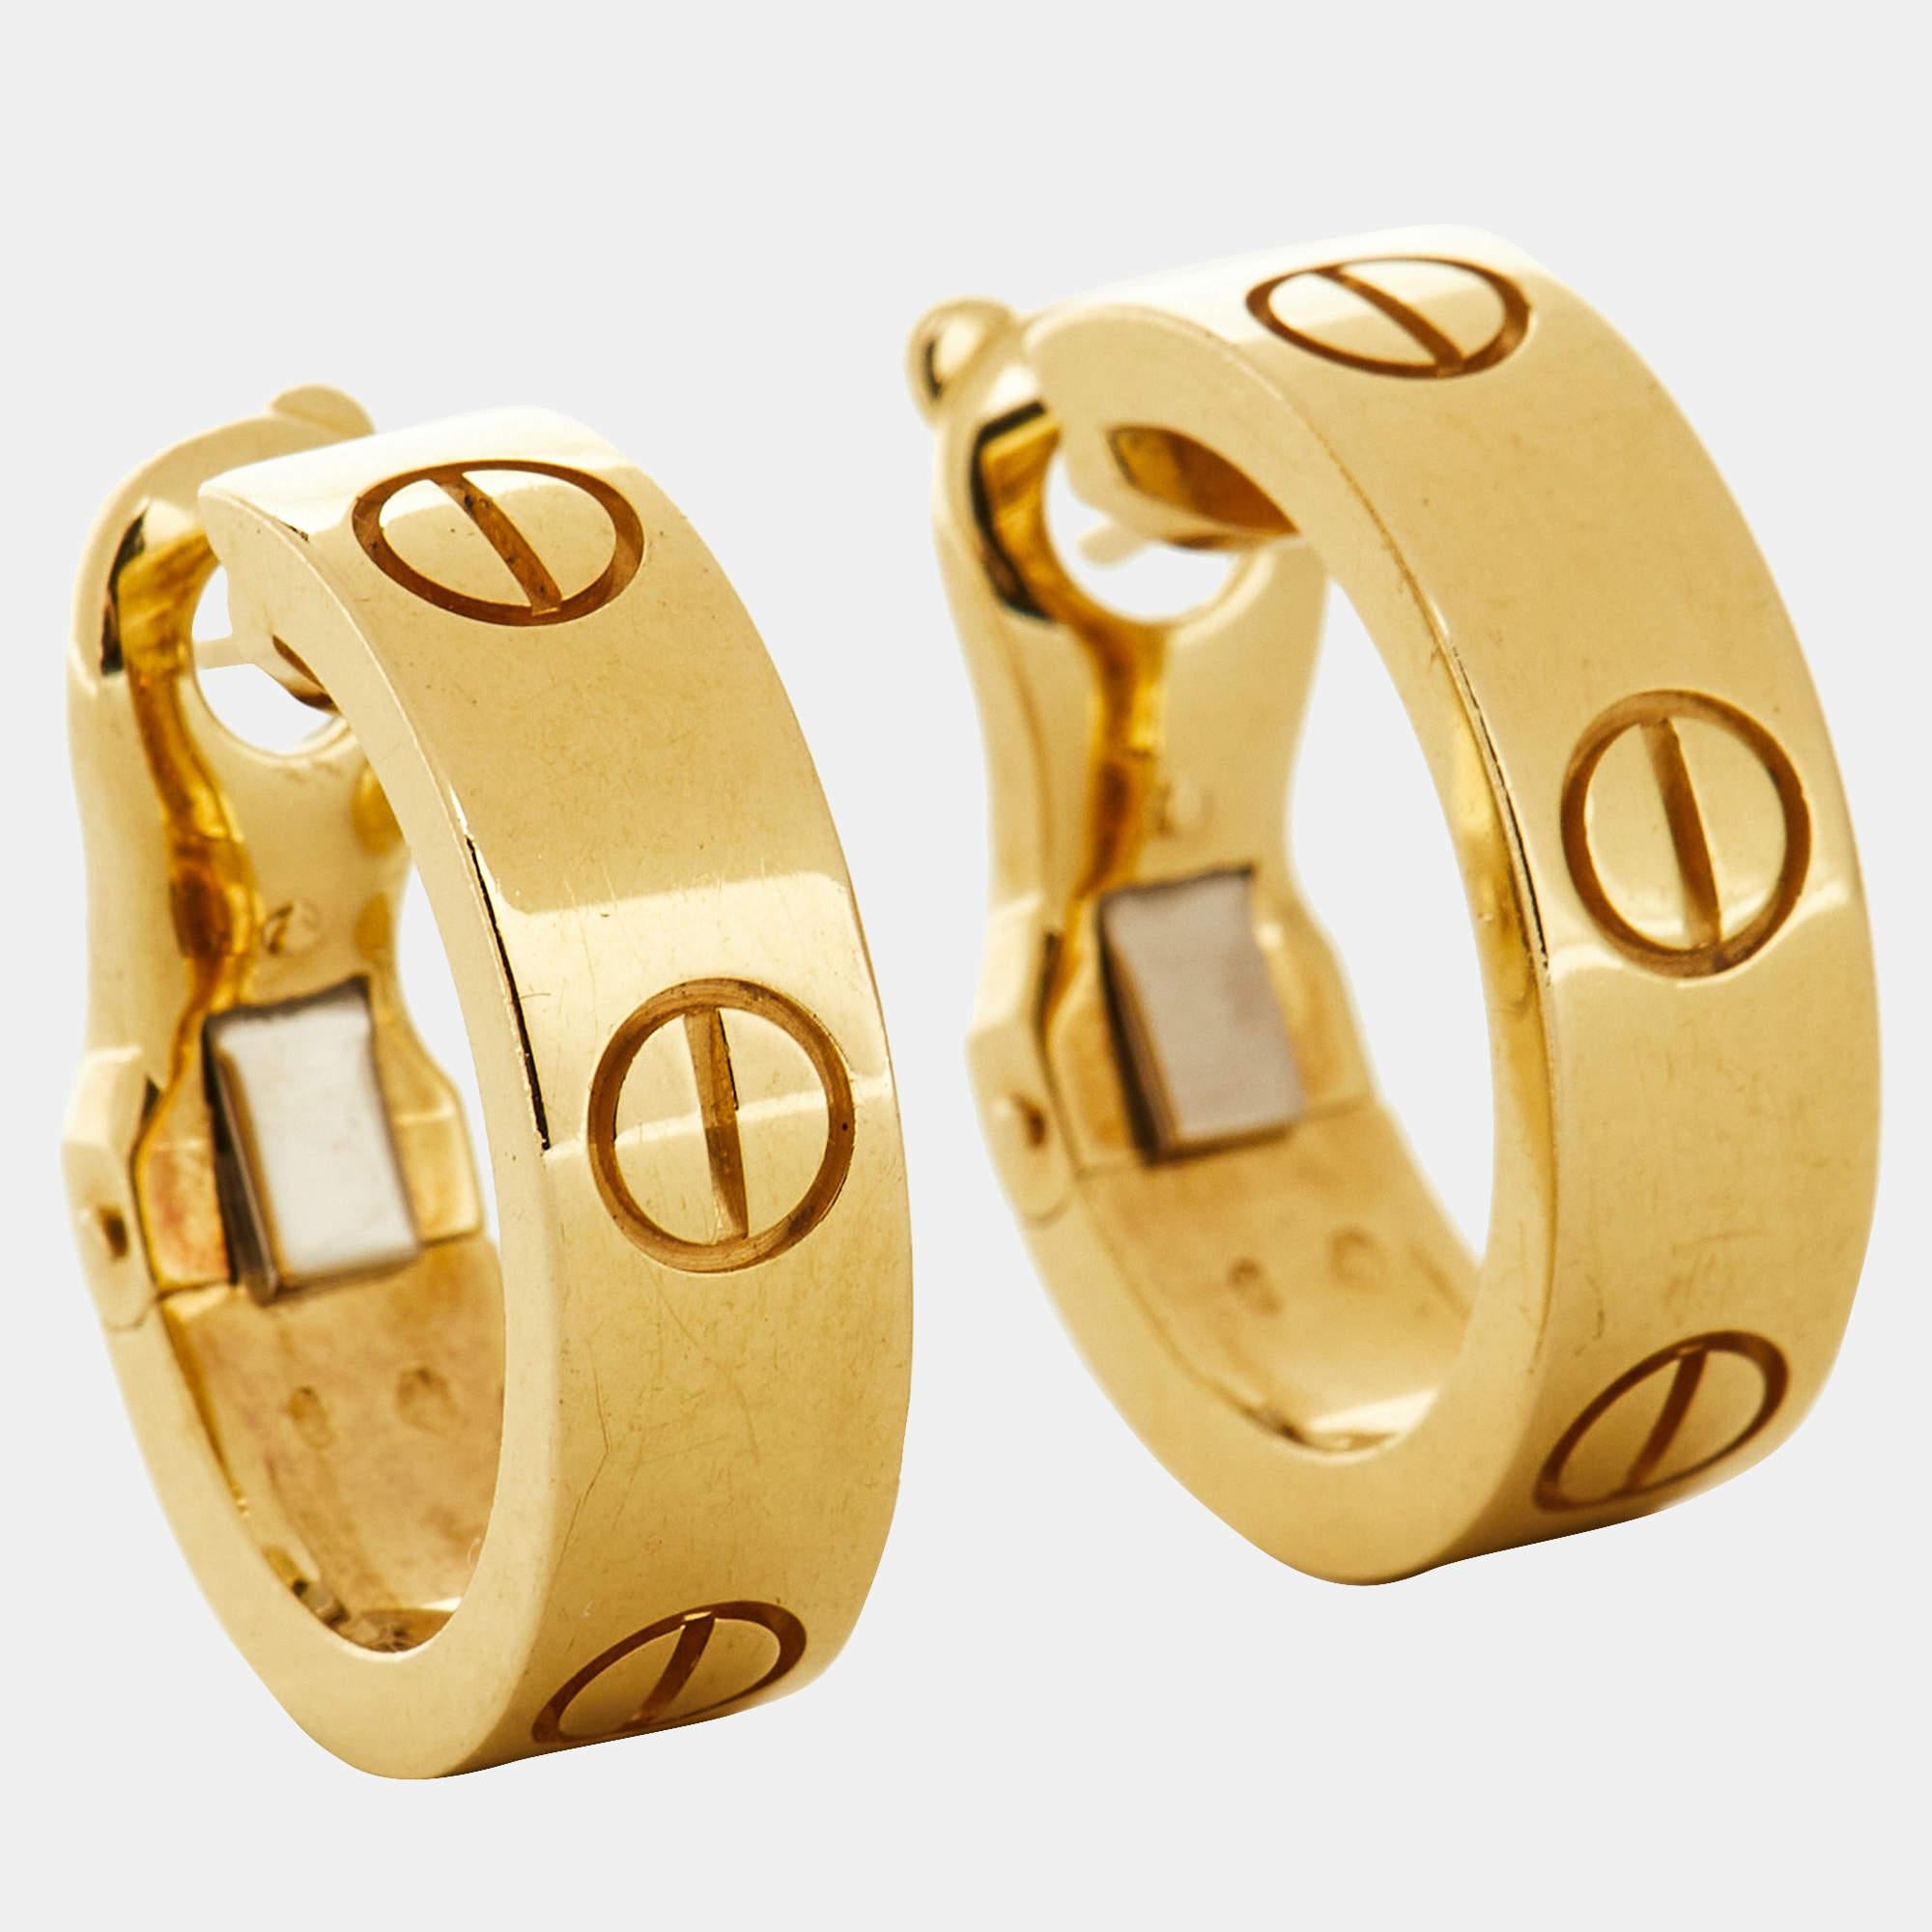 These Cartier earrings can be your staple pick. They have been sculpted using 18k yellow gold into a hoop style with brand detailing and recognizable motifs to form a stunning outline.

Includes: Authenticity Card, Original Box